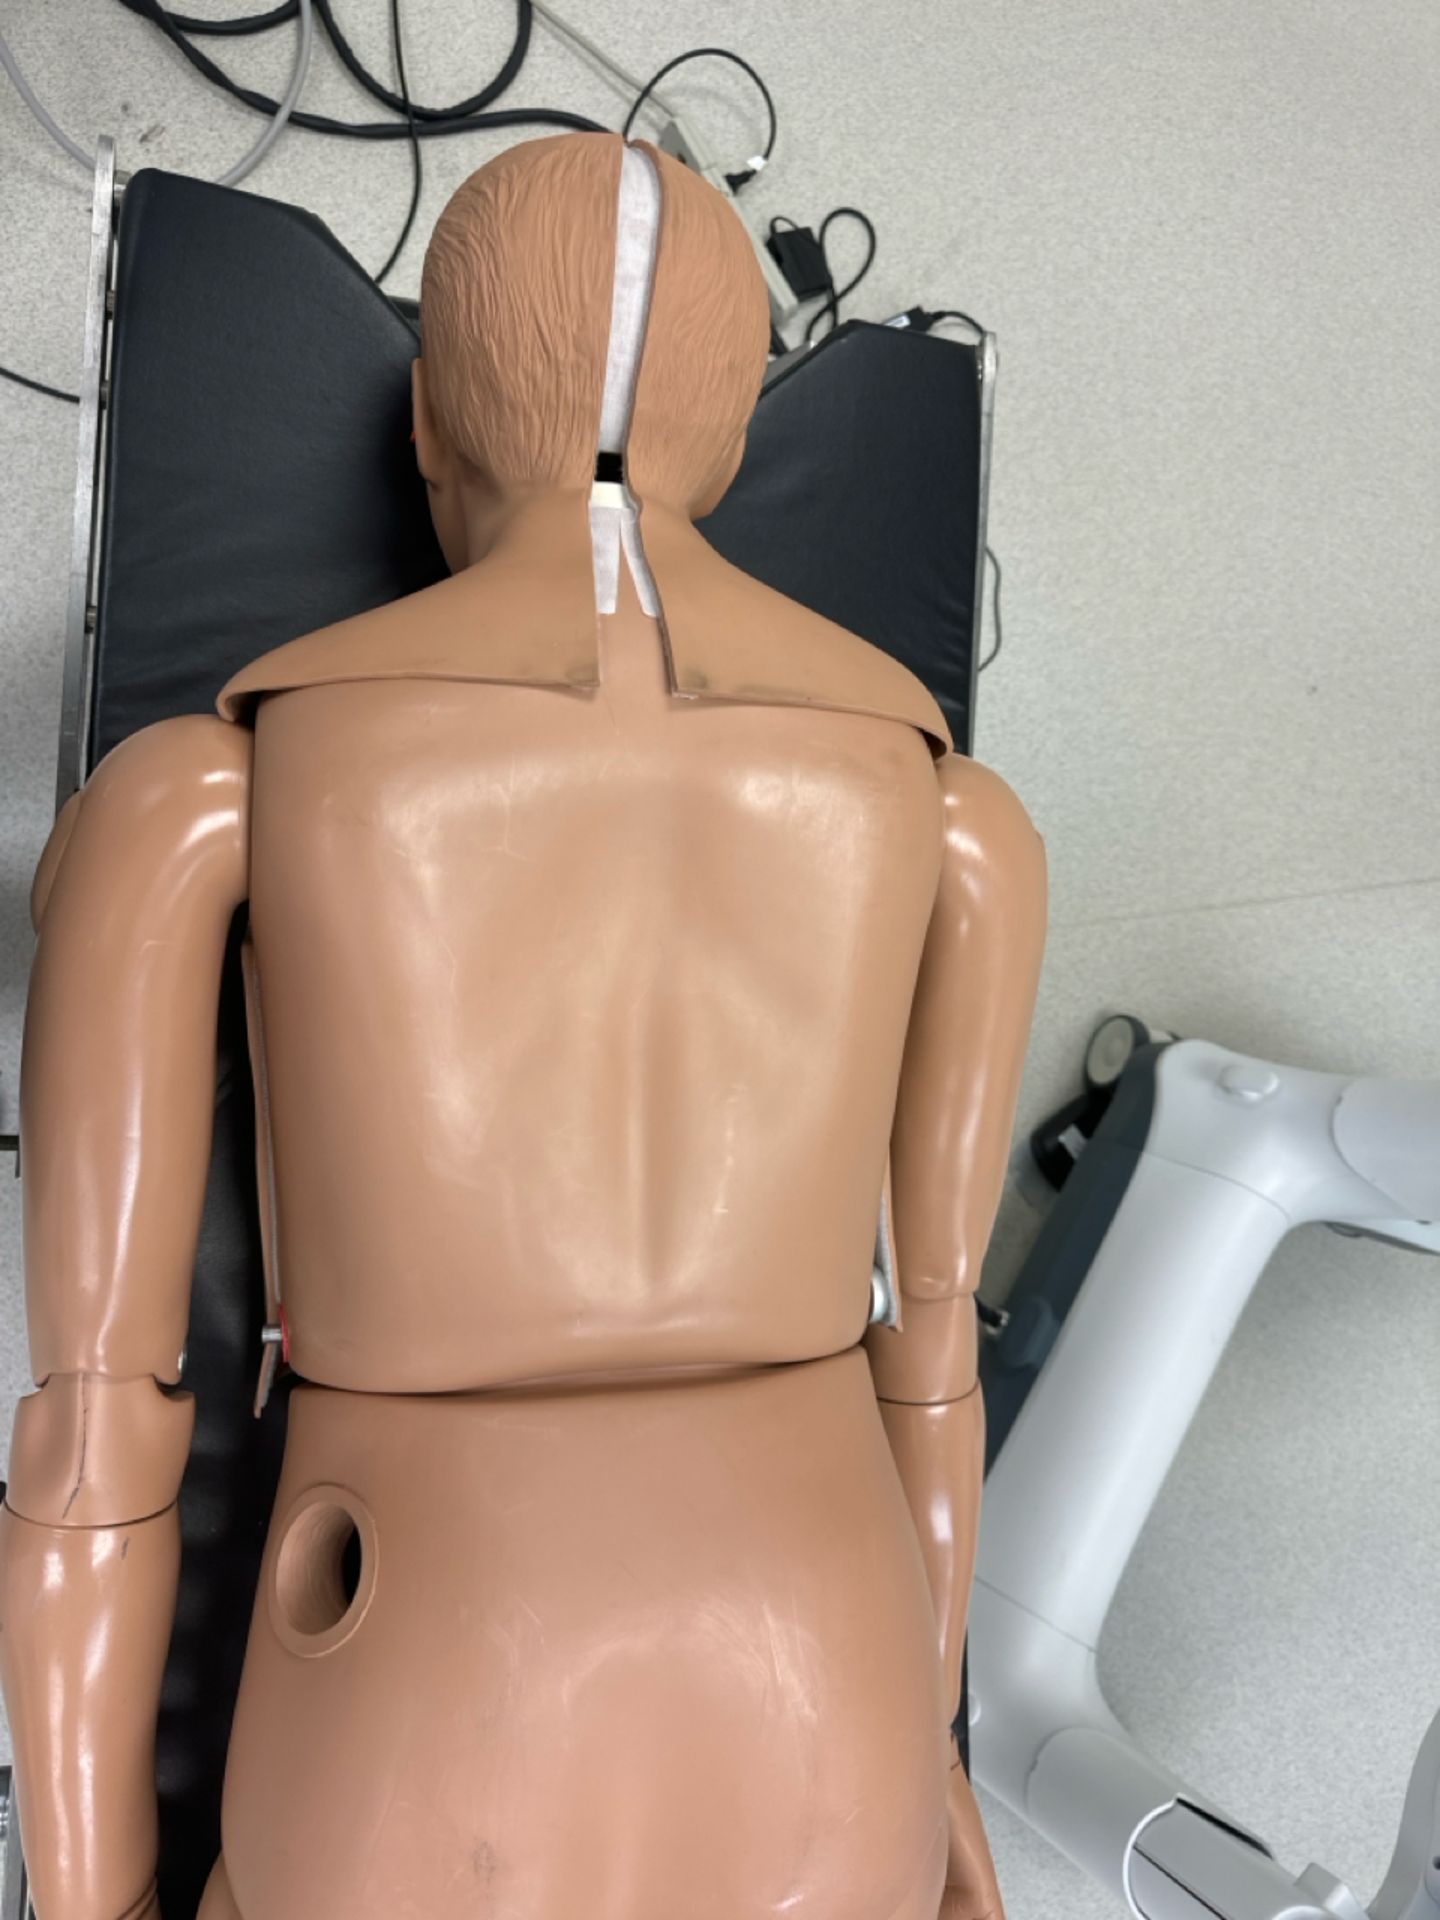 Universal Medical Human Mannequin - Image 6 of 6